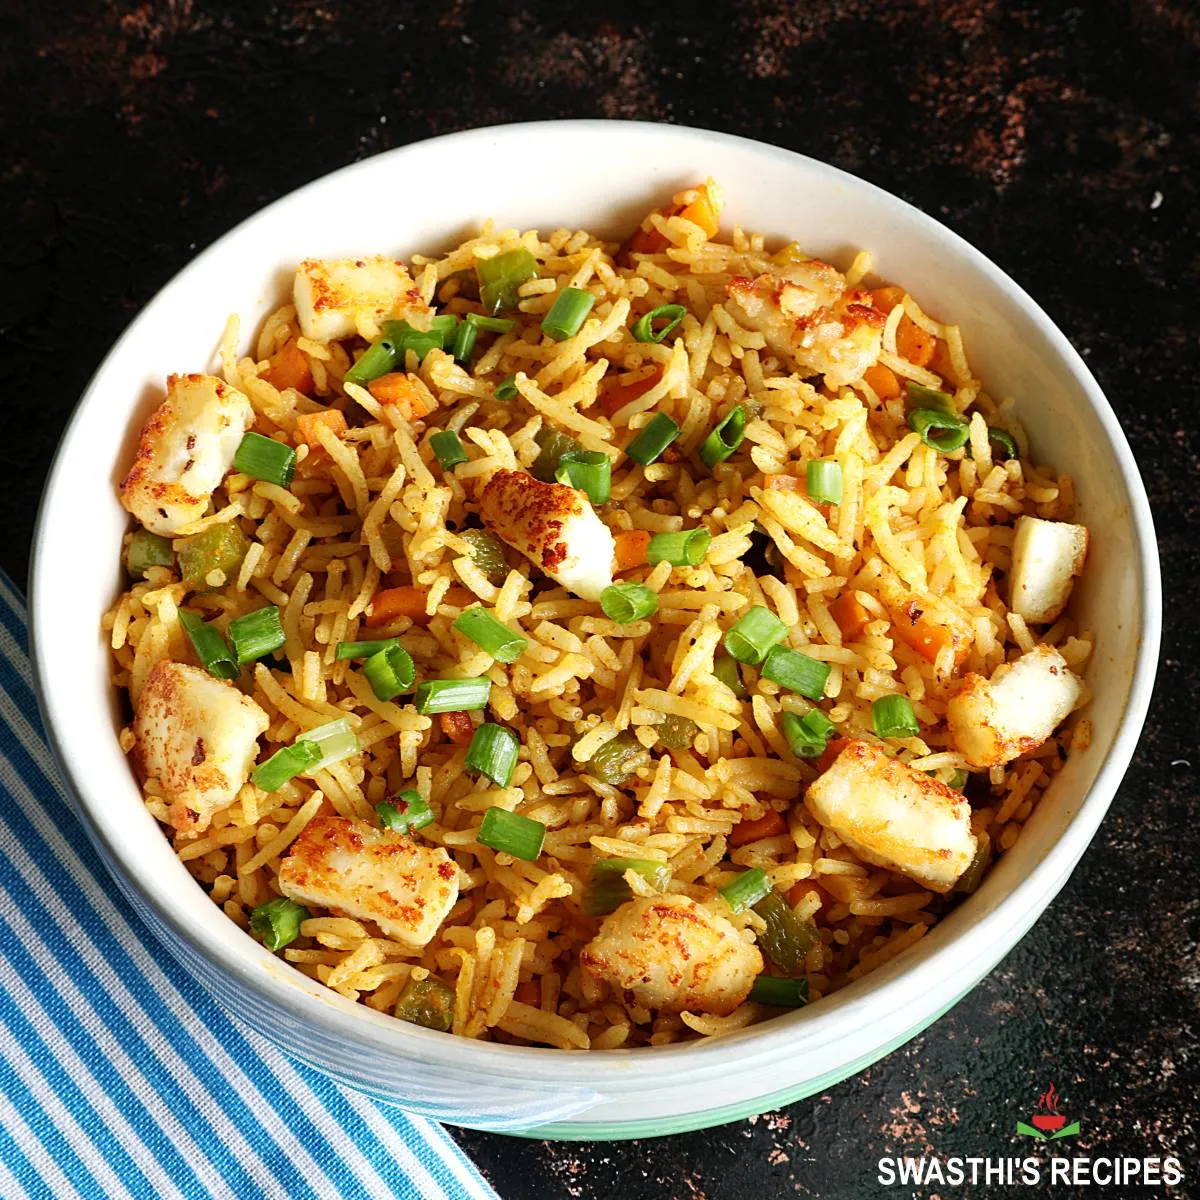 Singapore fried rice is a Indian Chinese fusion rice dish